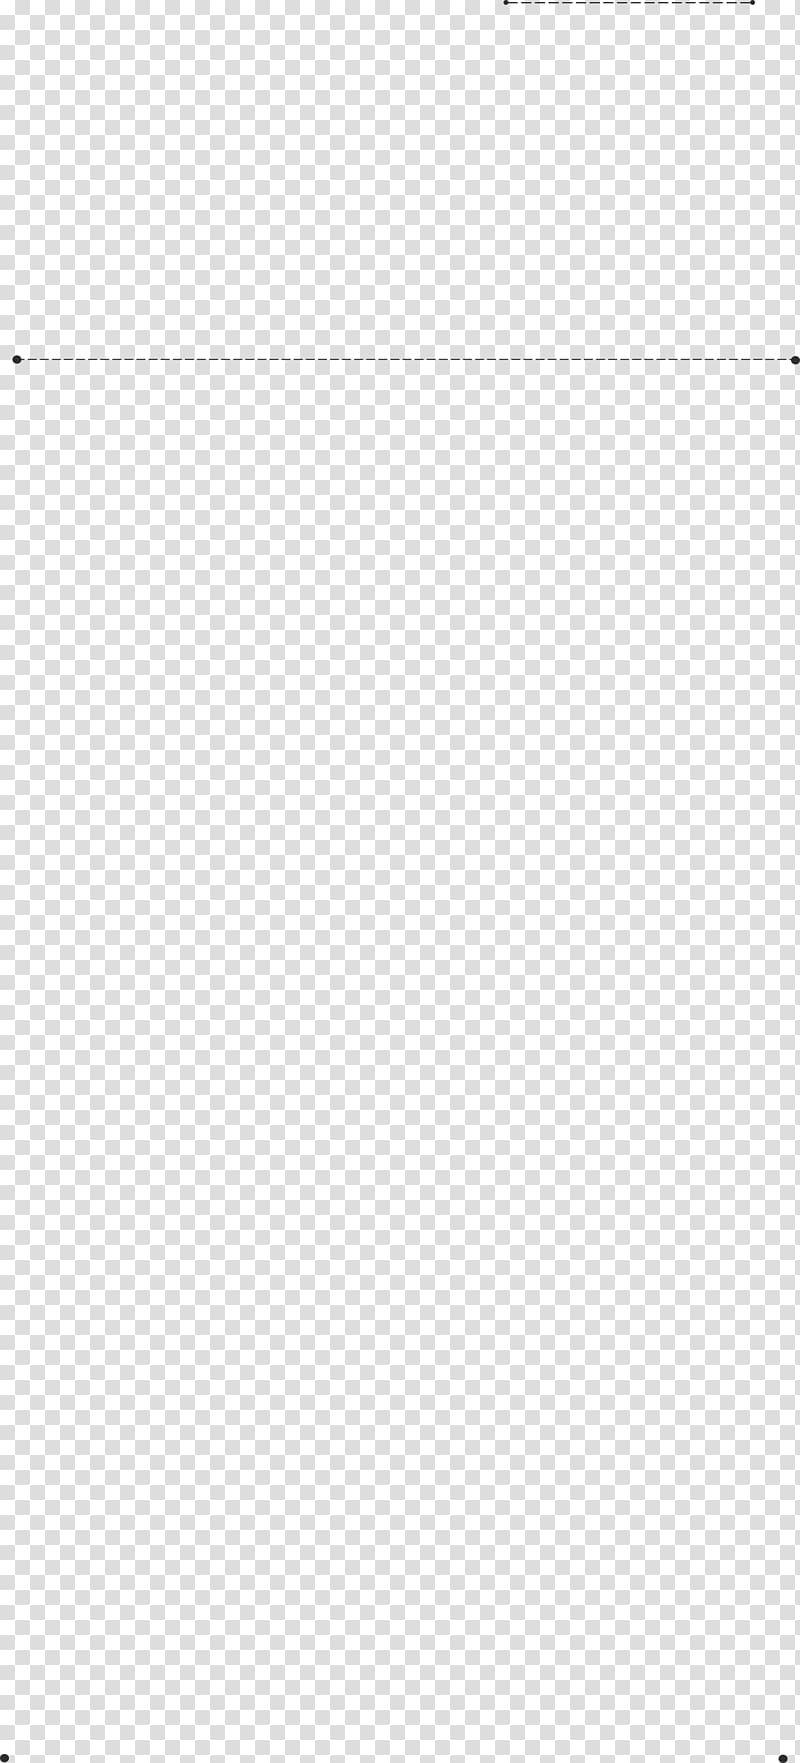 Black White Border, dotted line transparent background PNG clipart